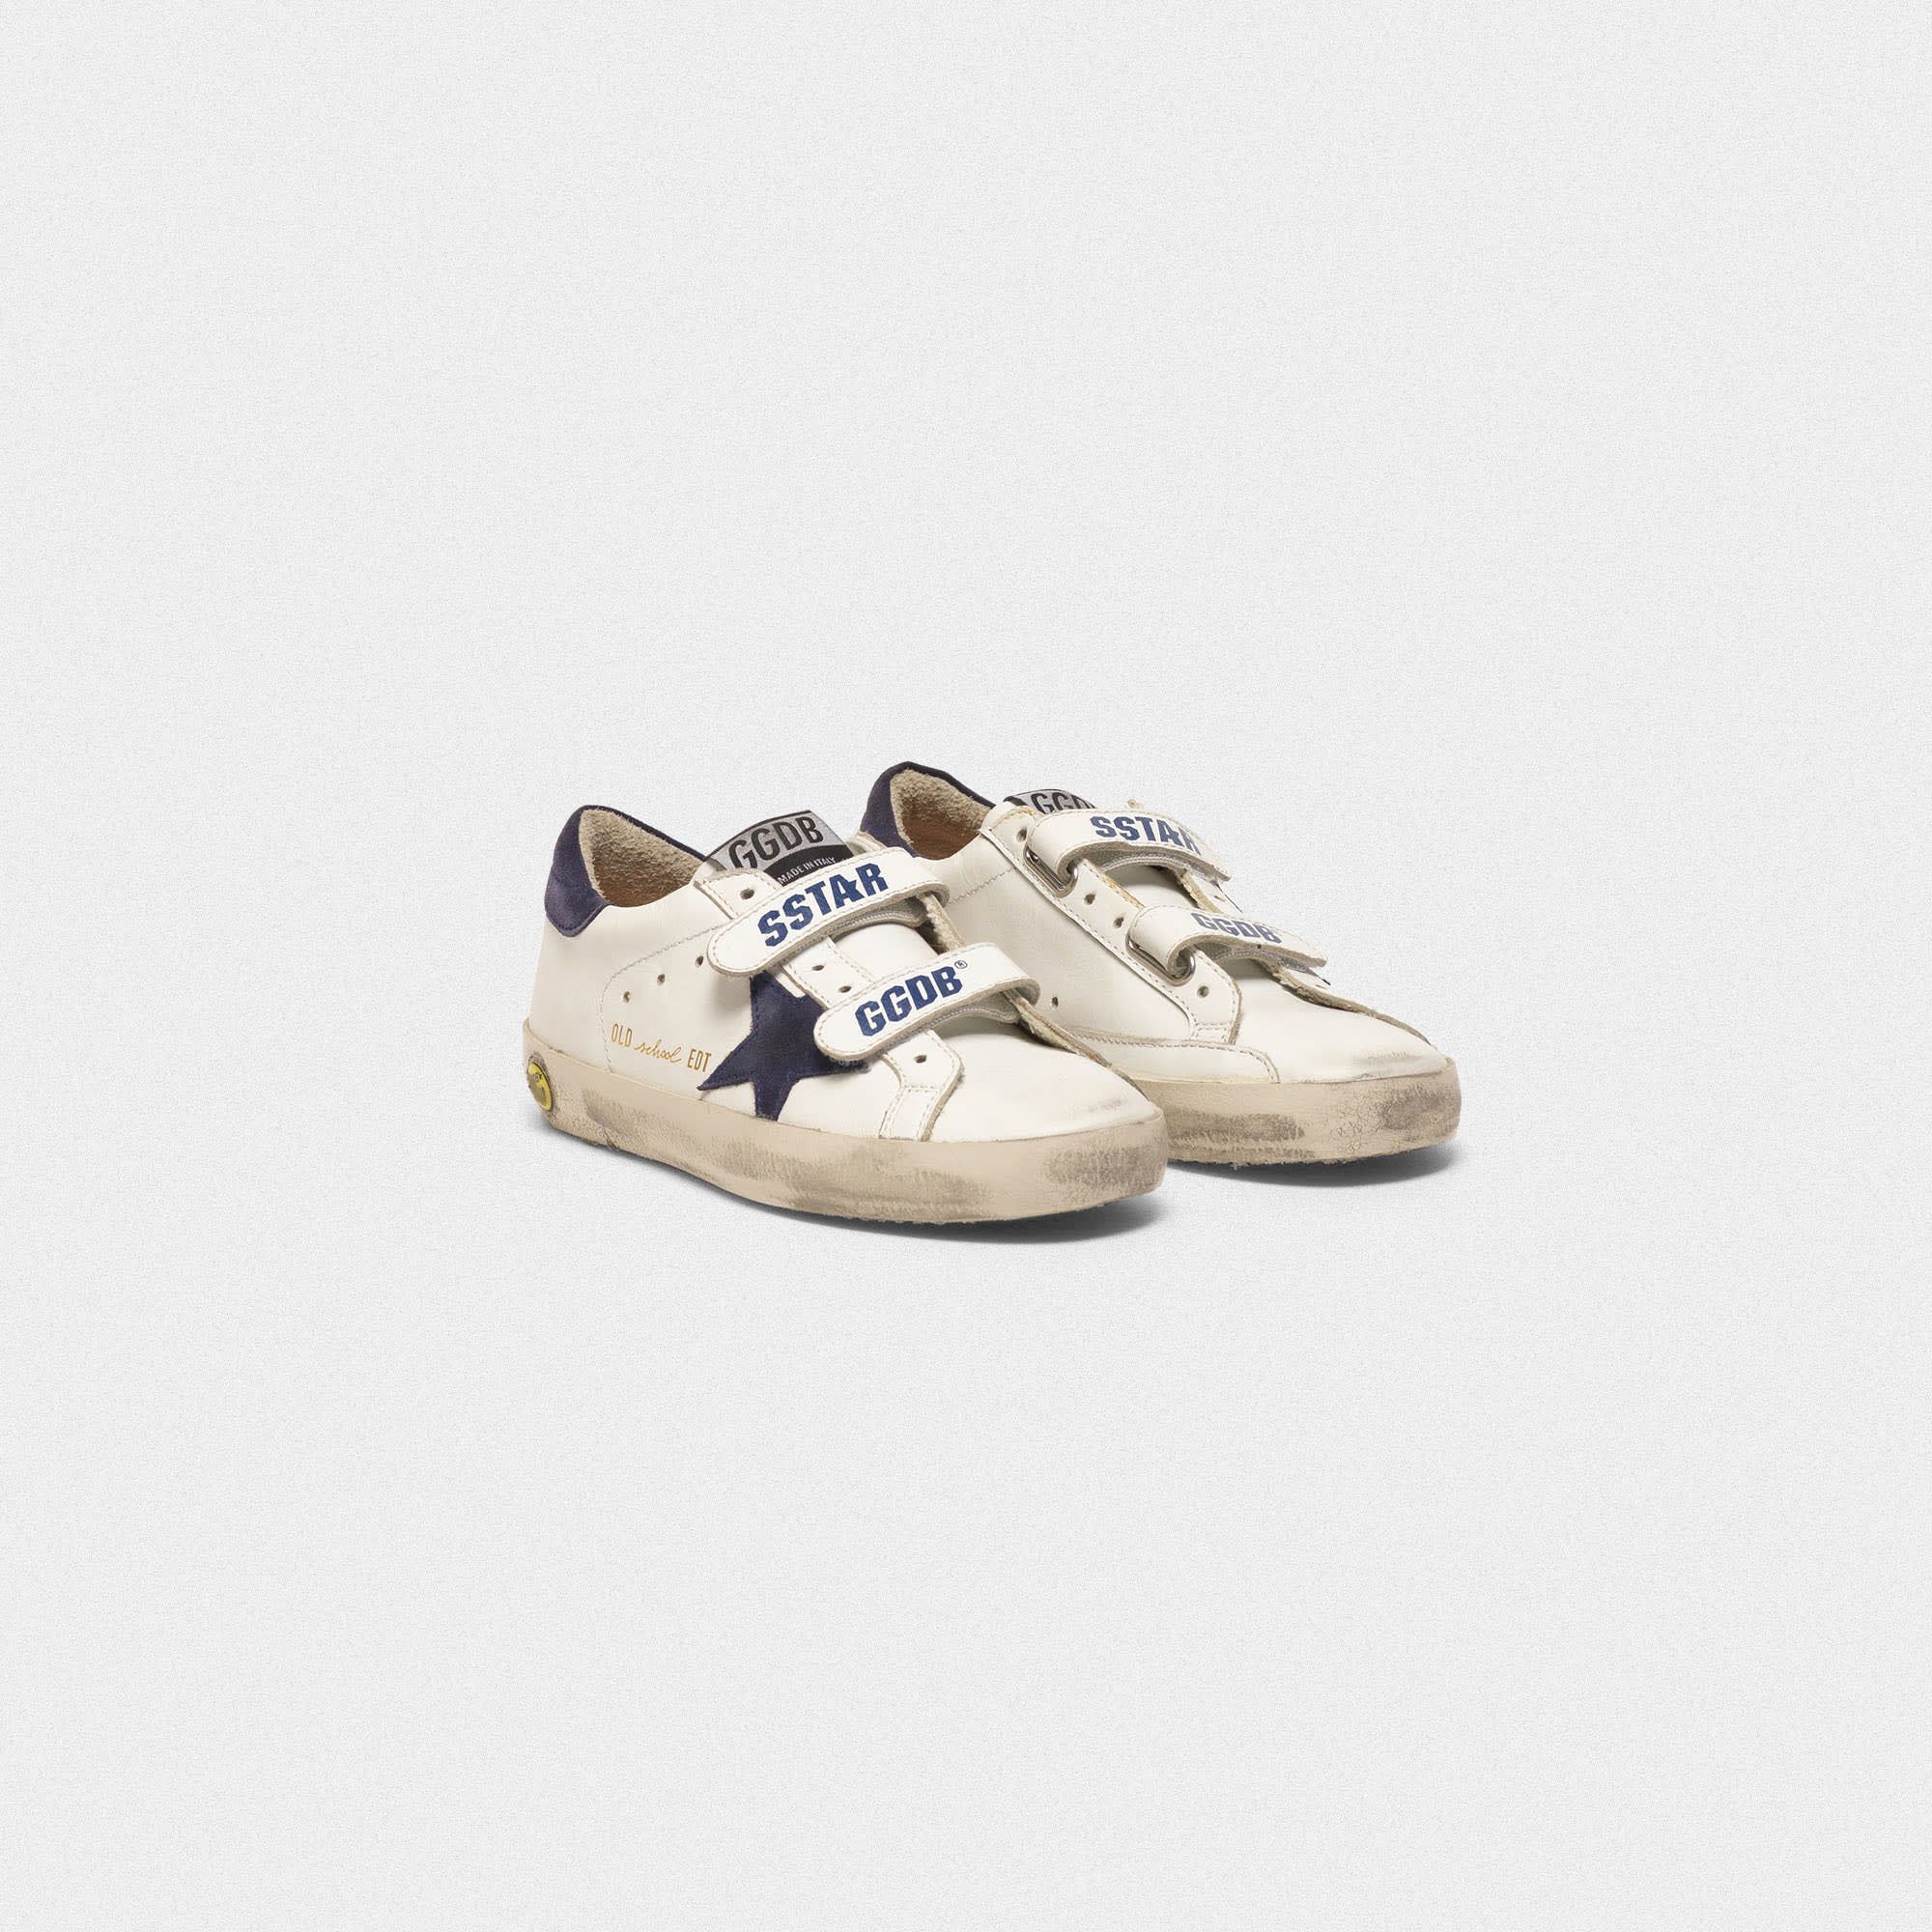 Old School sneakers in leather with suede star and heel tab